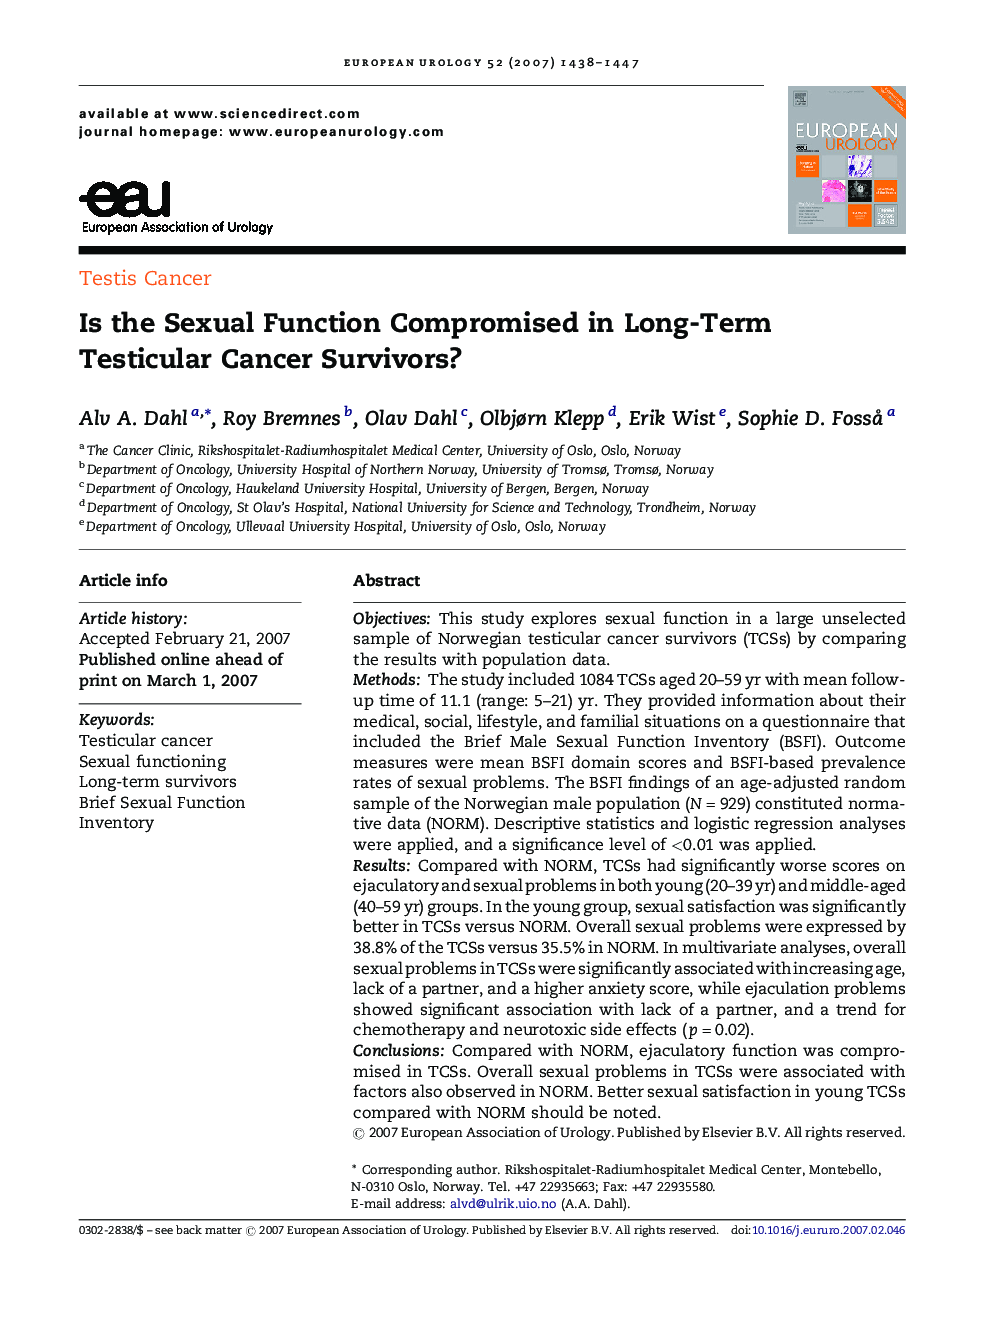 Is the Sexual Function Compromised in Long-Term Testicular Cancer Survivors?